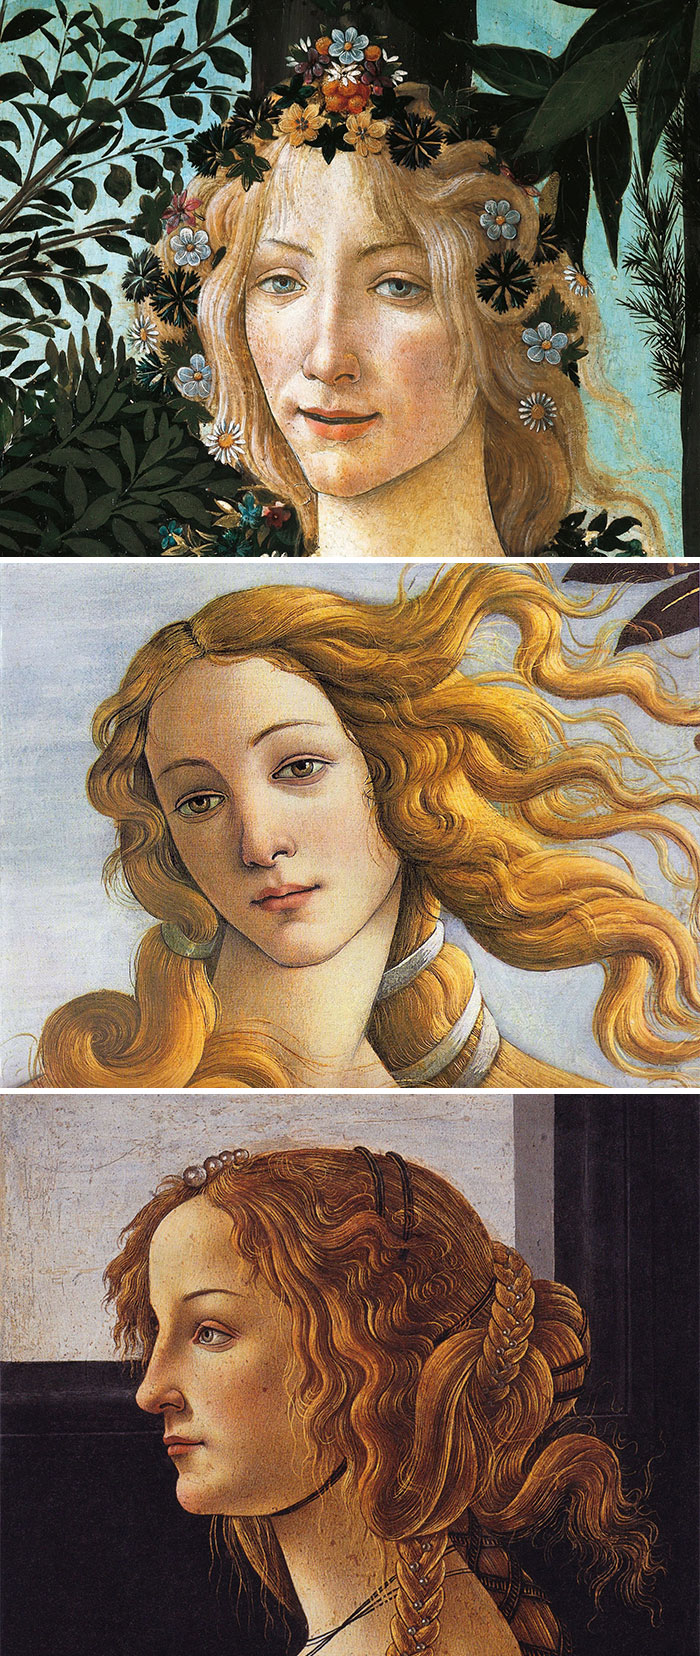 "If She's Blonde And Has This Exact Face, It's A Botticelli"